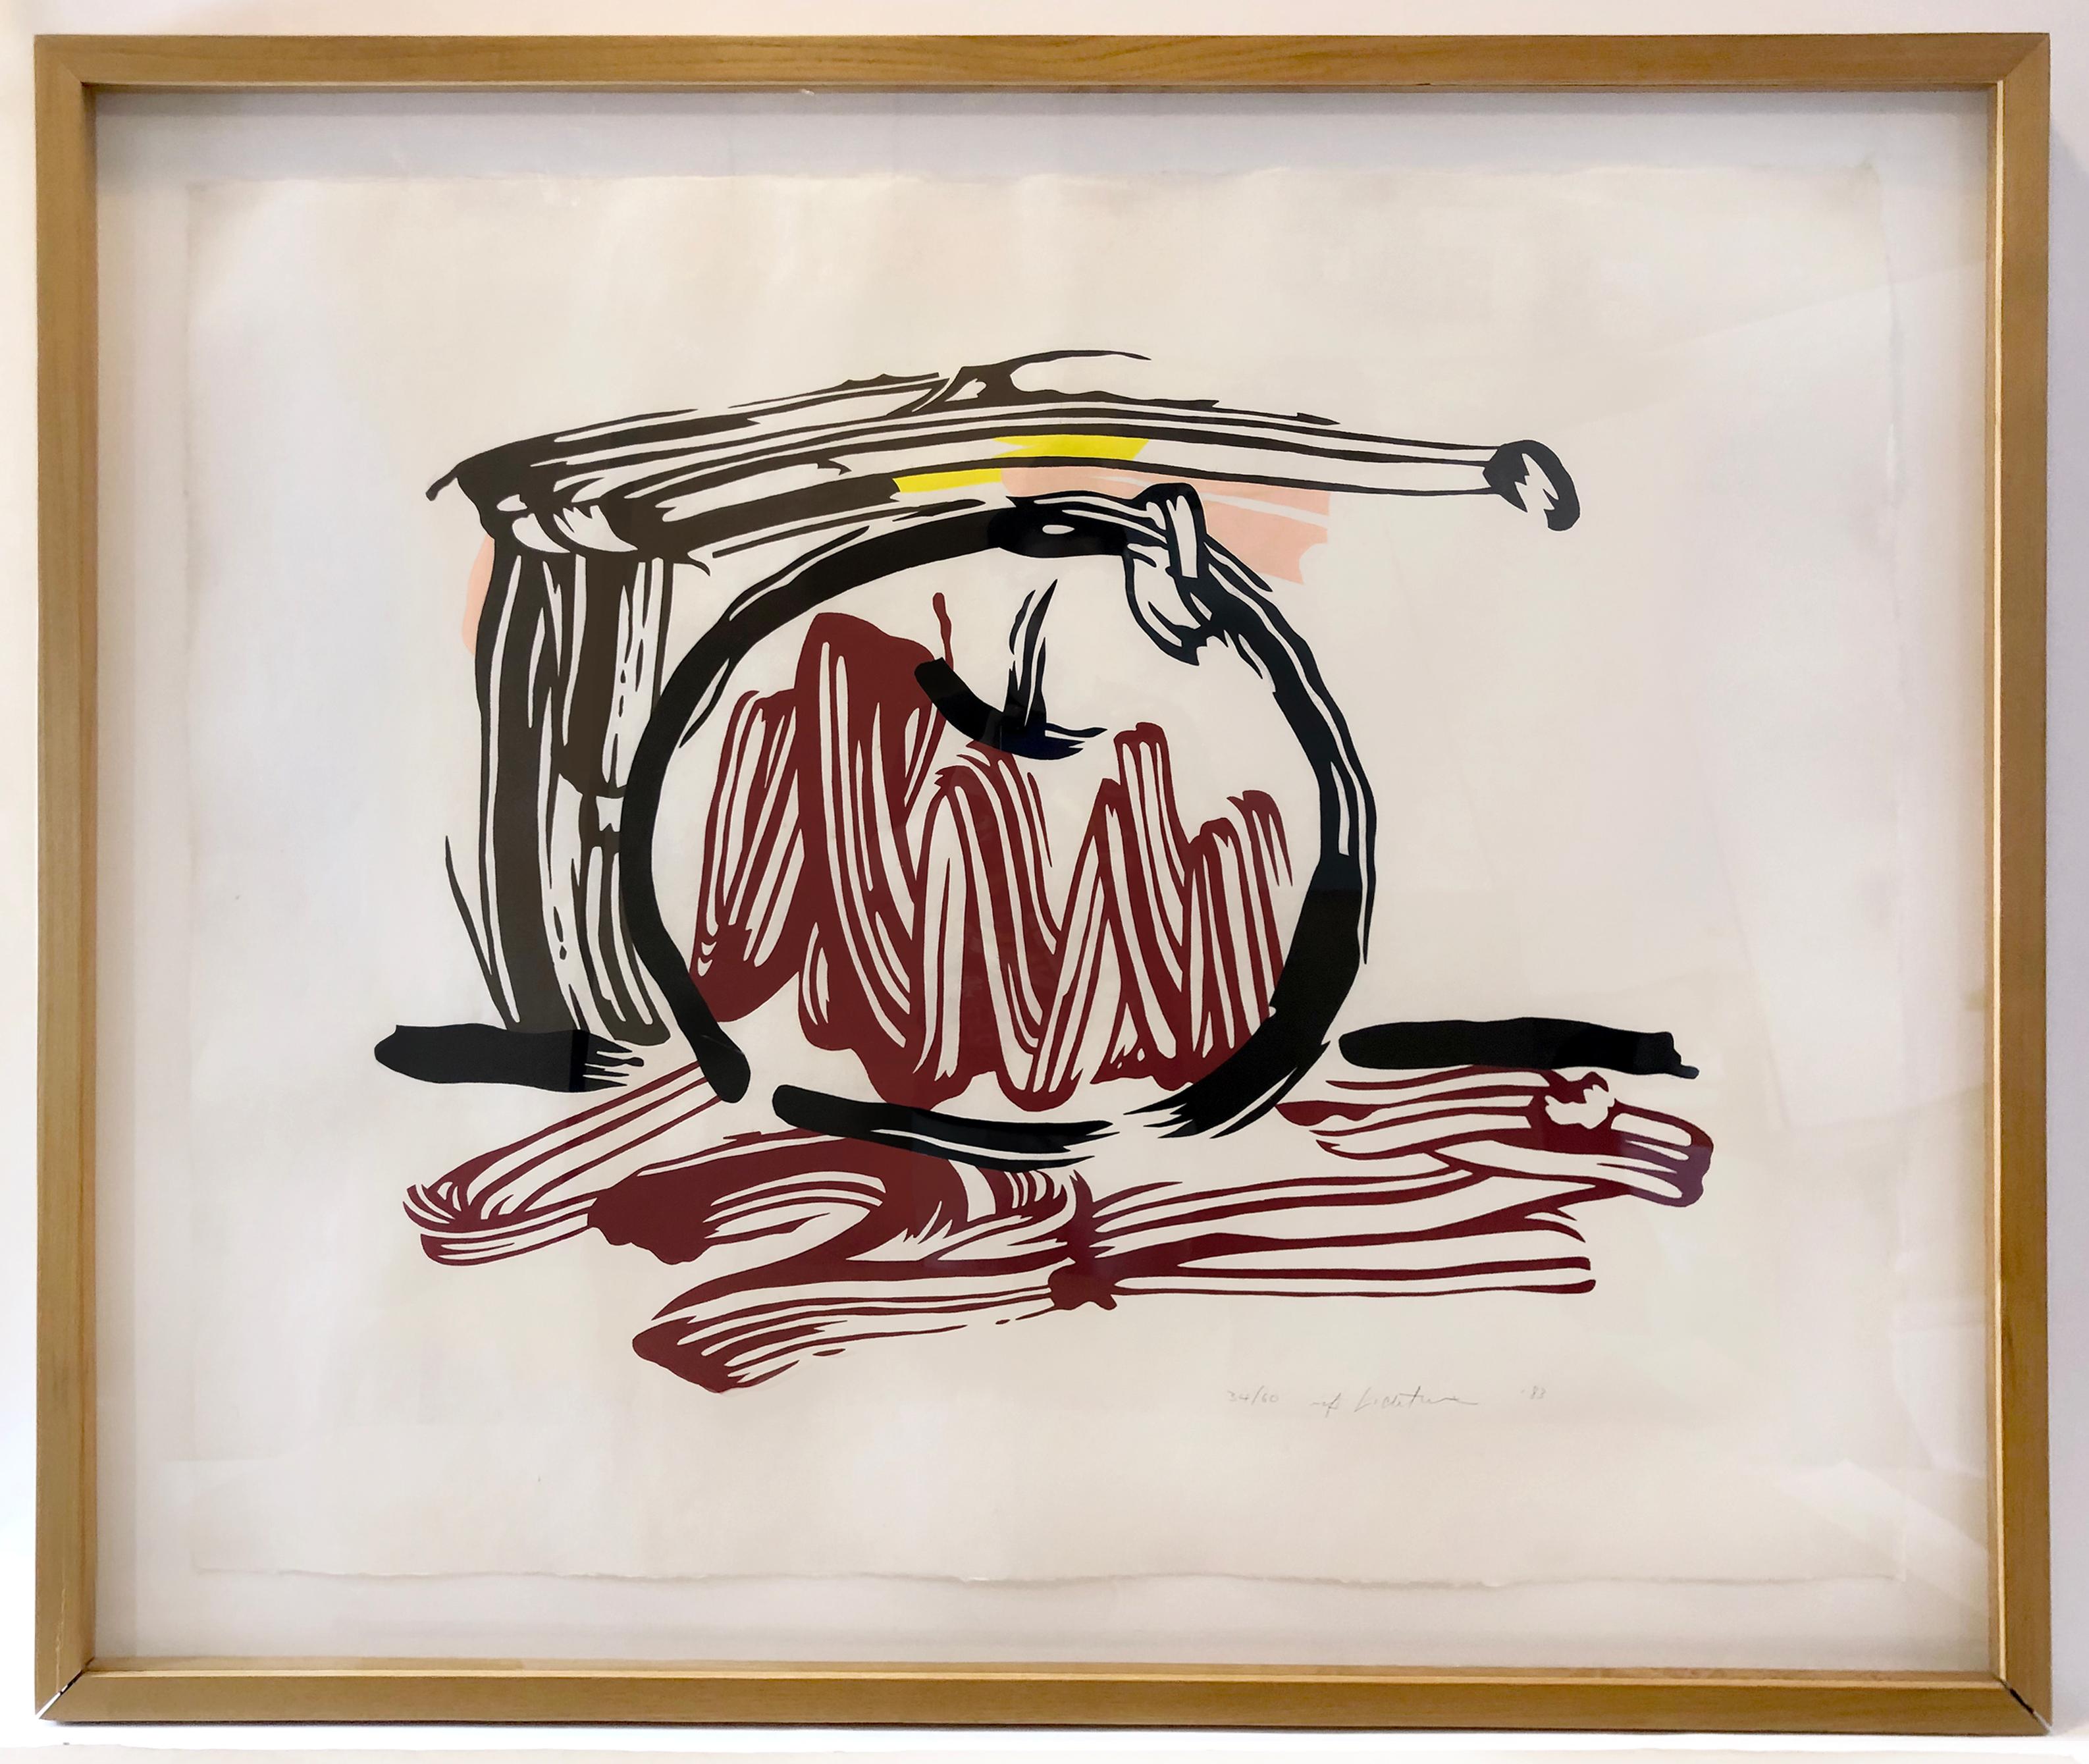 This Roy Lichtenstein woodcut from the Seven Apple Woodcuts portfolio is an electric take on the humble still life. Striated black brushstrokes sketch the outline of an apple, filled with graphic ribbons of color that fall in folds towards the